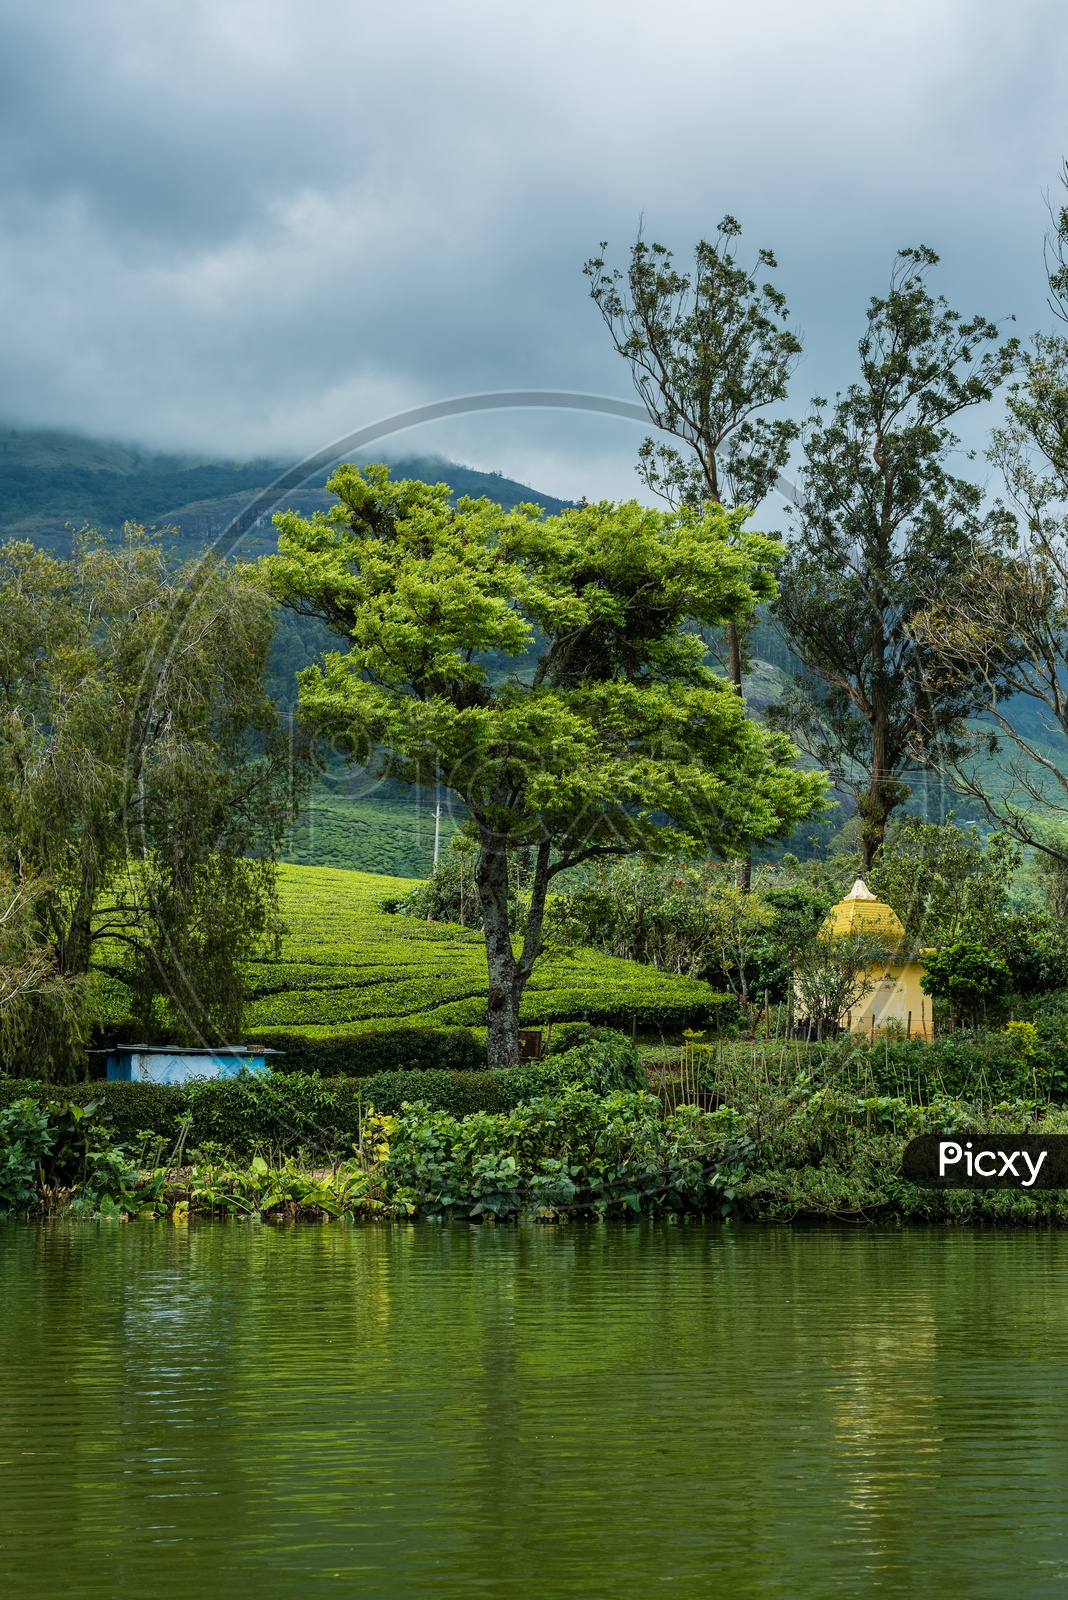 Get lost in lush greenery of Munnar